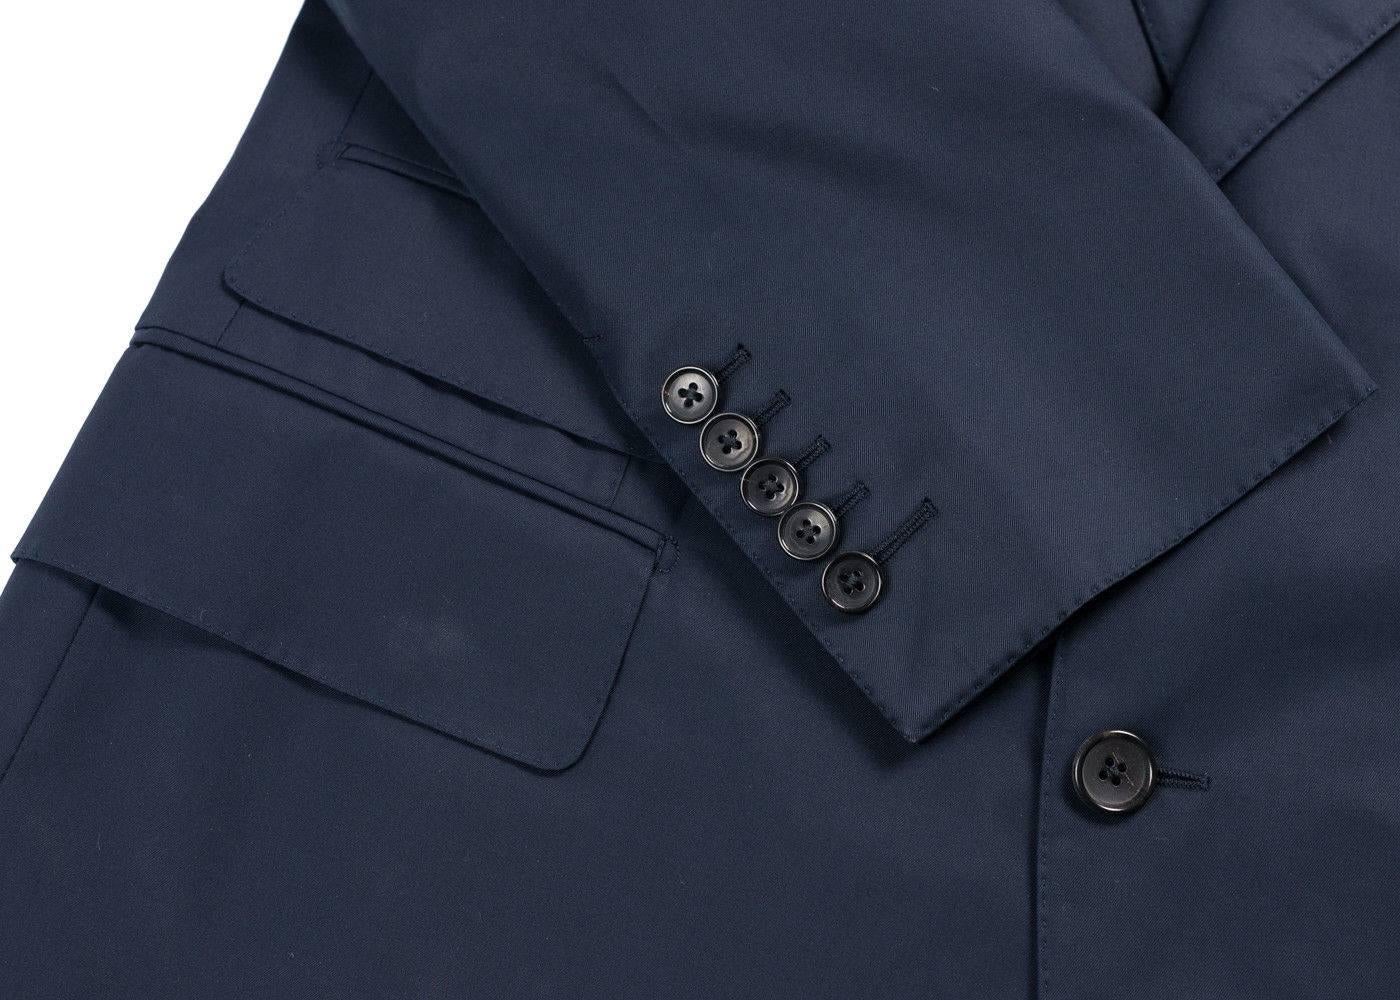 Brand New Tom Ford Shelton Jacket
Original Tags & Hanger Included
Retails In-Store & Online for $4680
Size EUR 54R / US 44 Fits True to Size


Lend a hint of effortless sophistication to your formal repertoire courtesy of Tom Ford's Shelton suit.